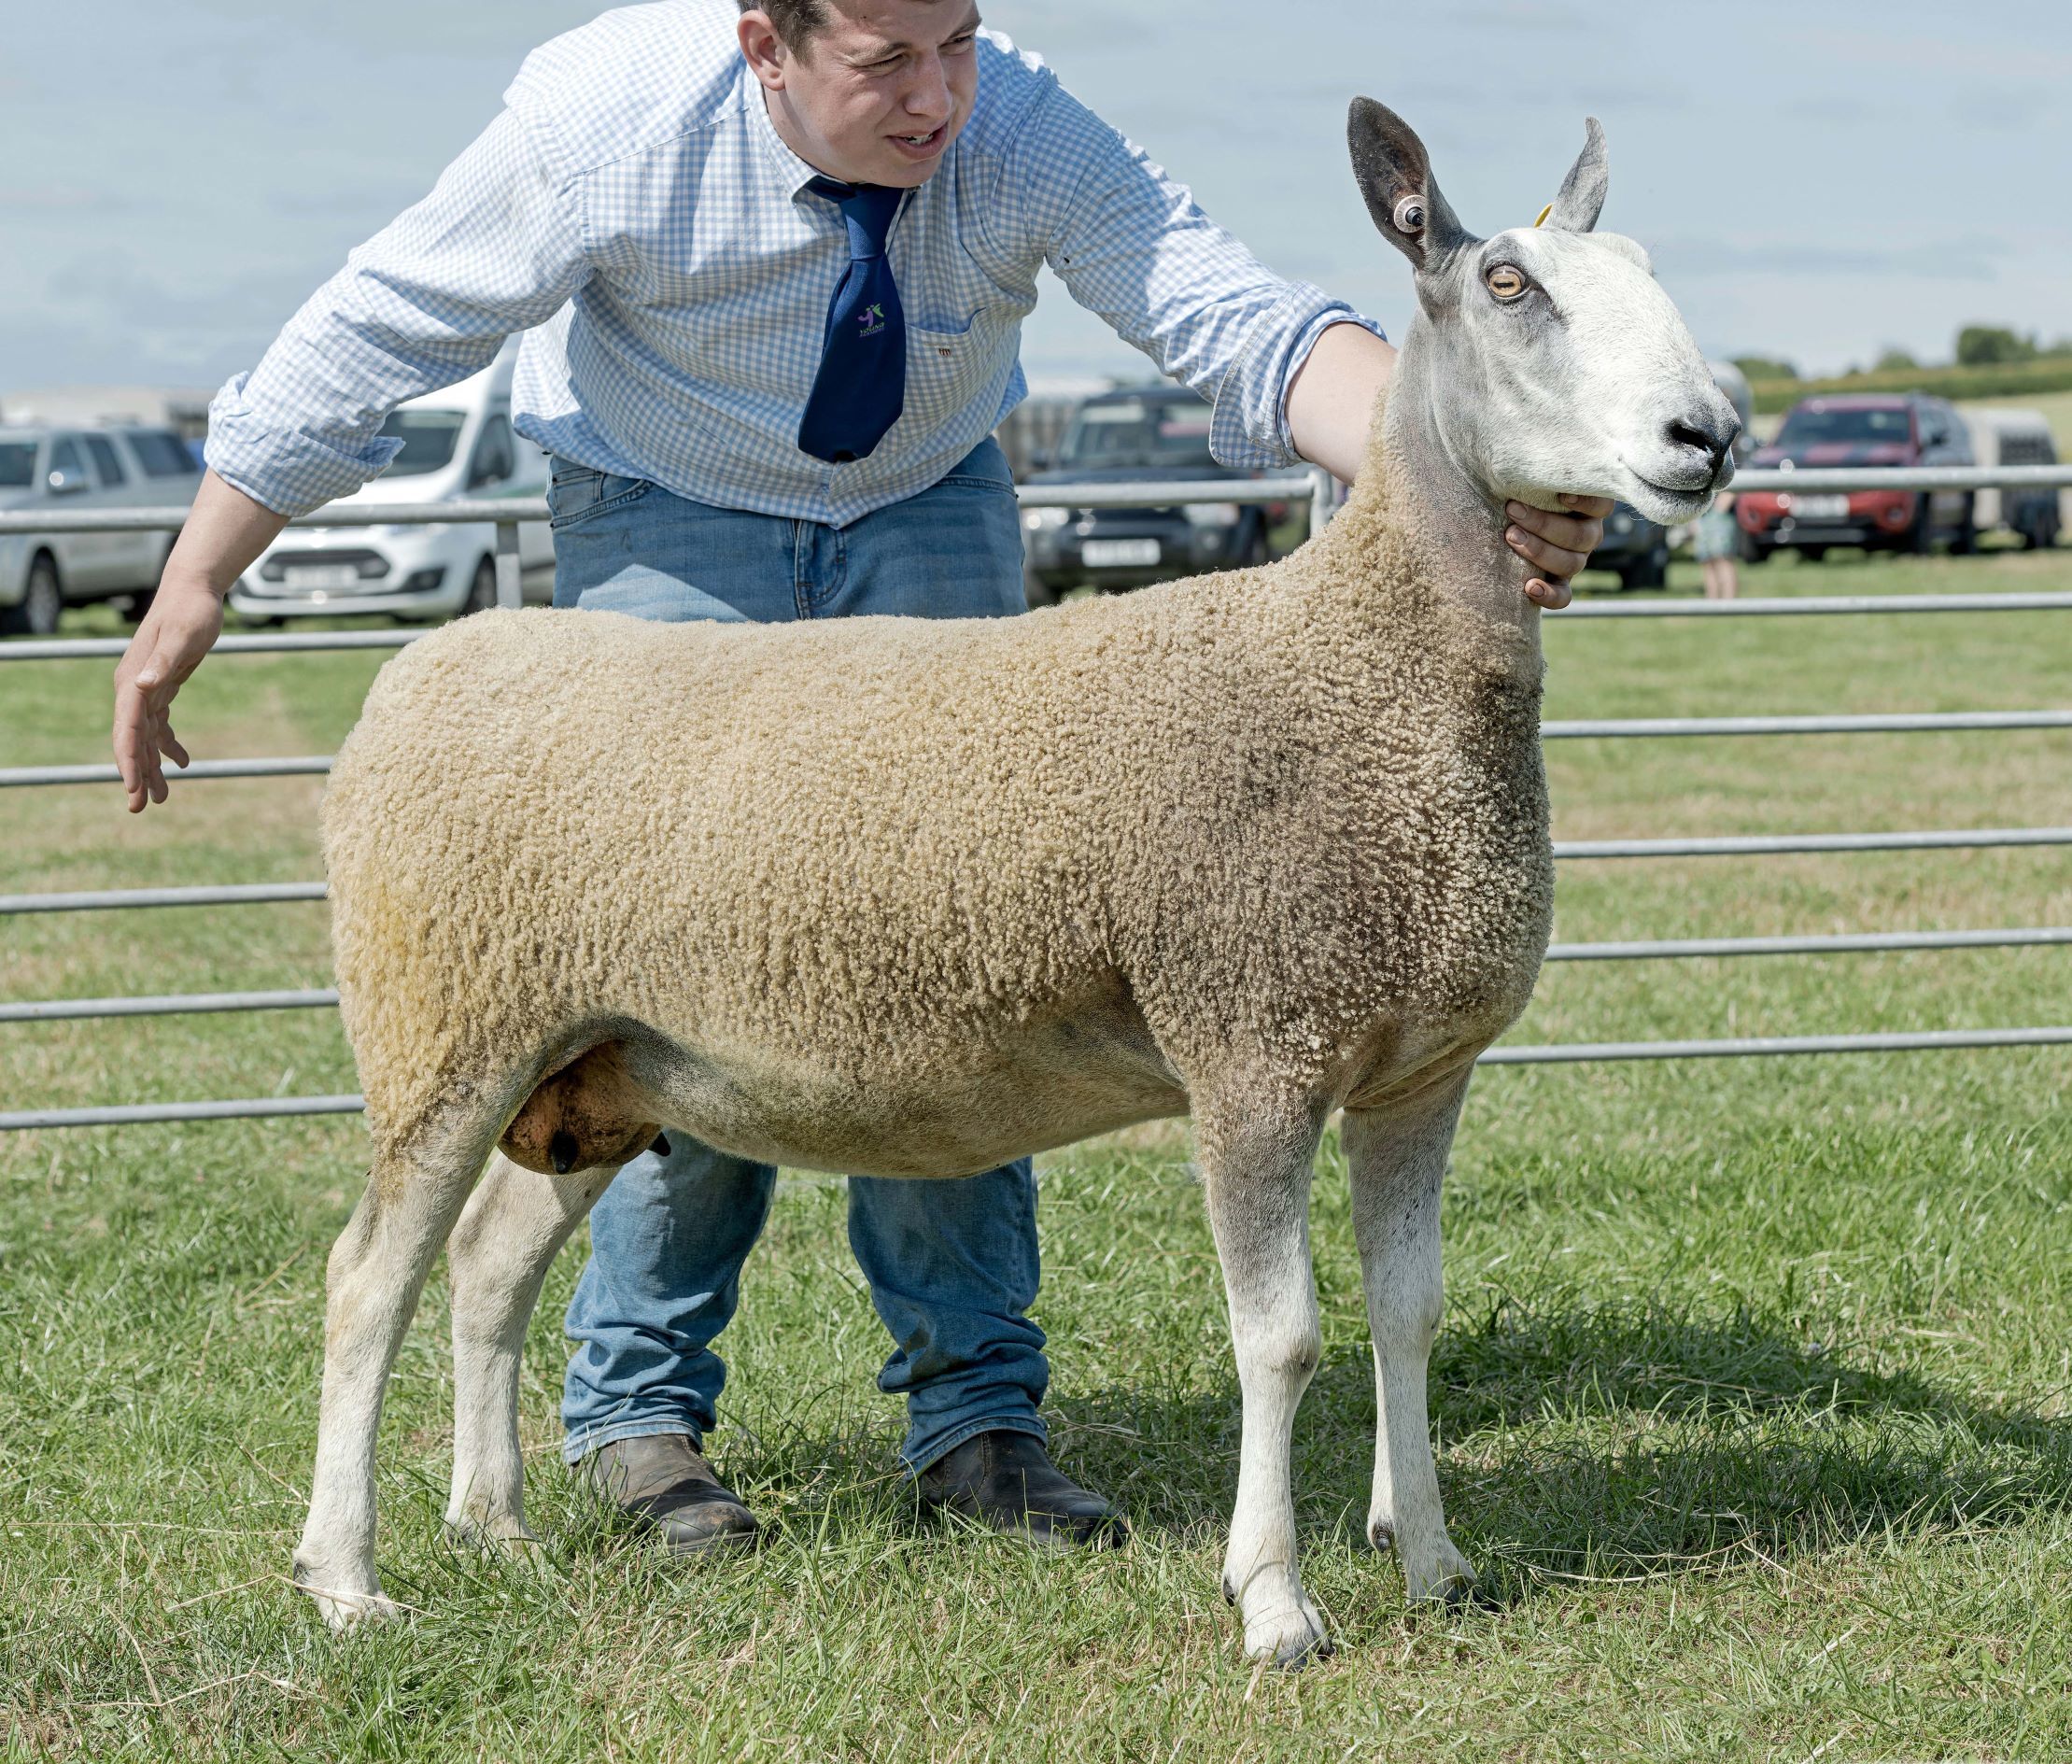 Andrew and James Adams Bluefaced Leicester ewe was any other breed champion